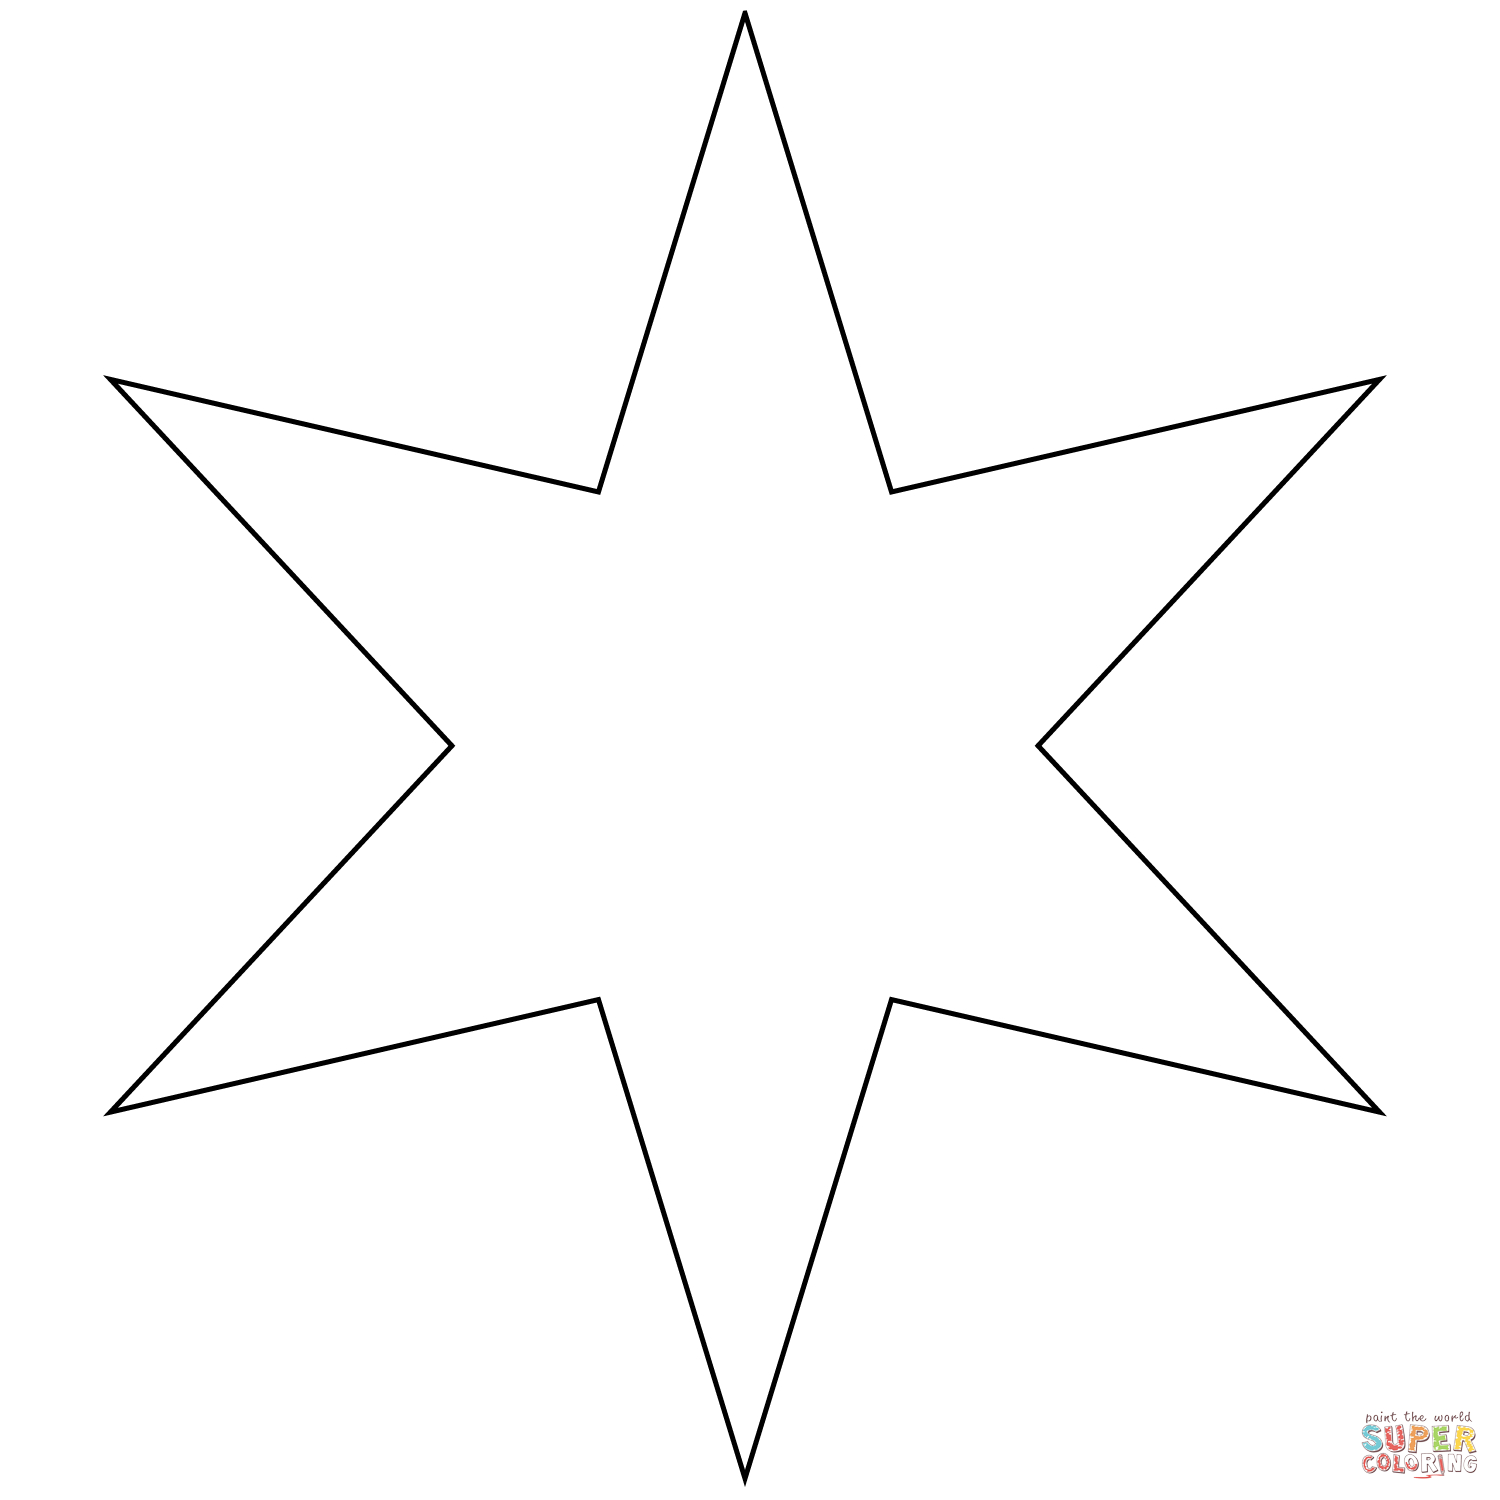 Six Pointed Star Coloring Page | Free Printable Coloring Pages - Free Printable Christmas Star Coloring Pages